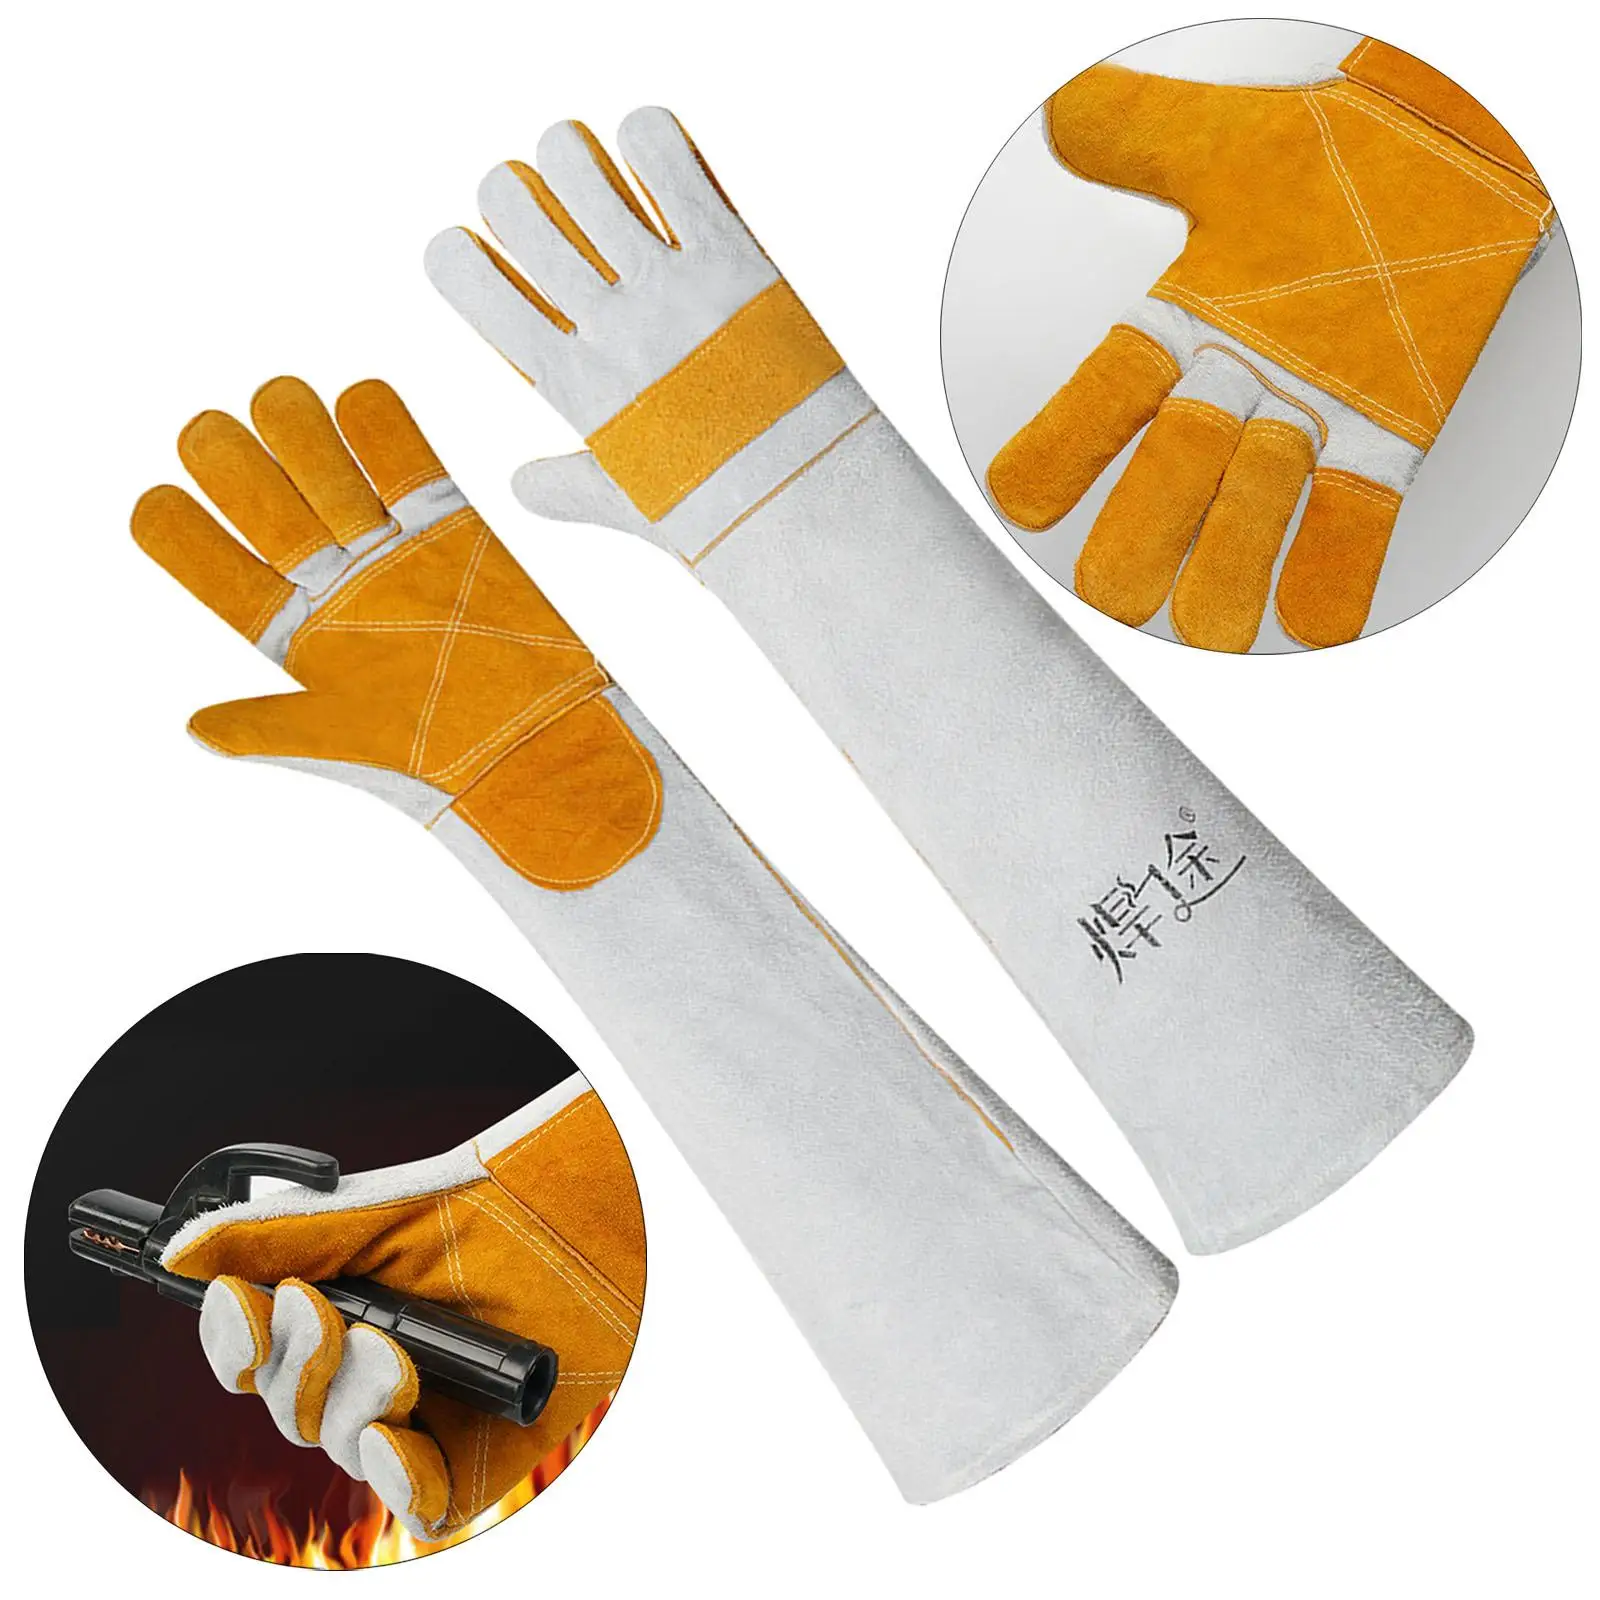 Pair of Electric Welding Gloves Wear Resistant Welding Accessories Protection Gloves Fireproof for Women Men